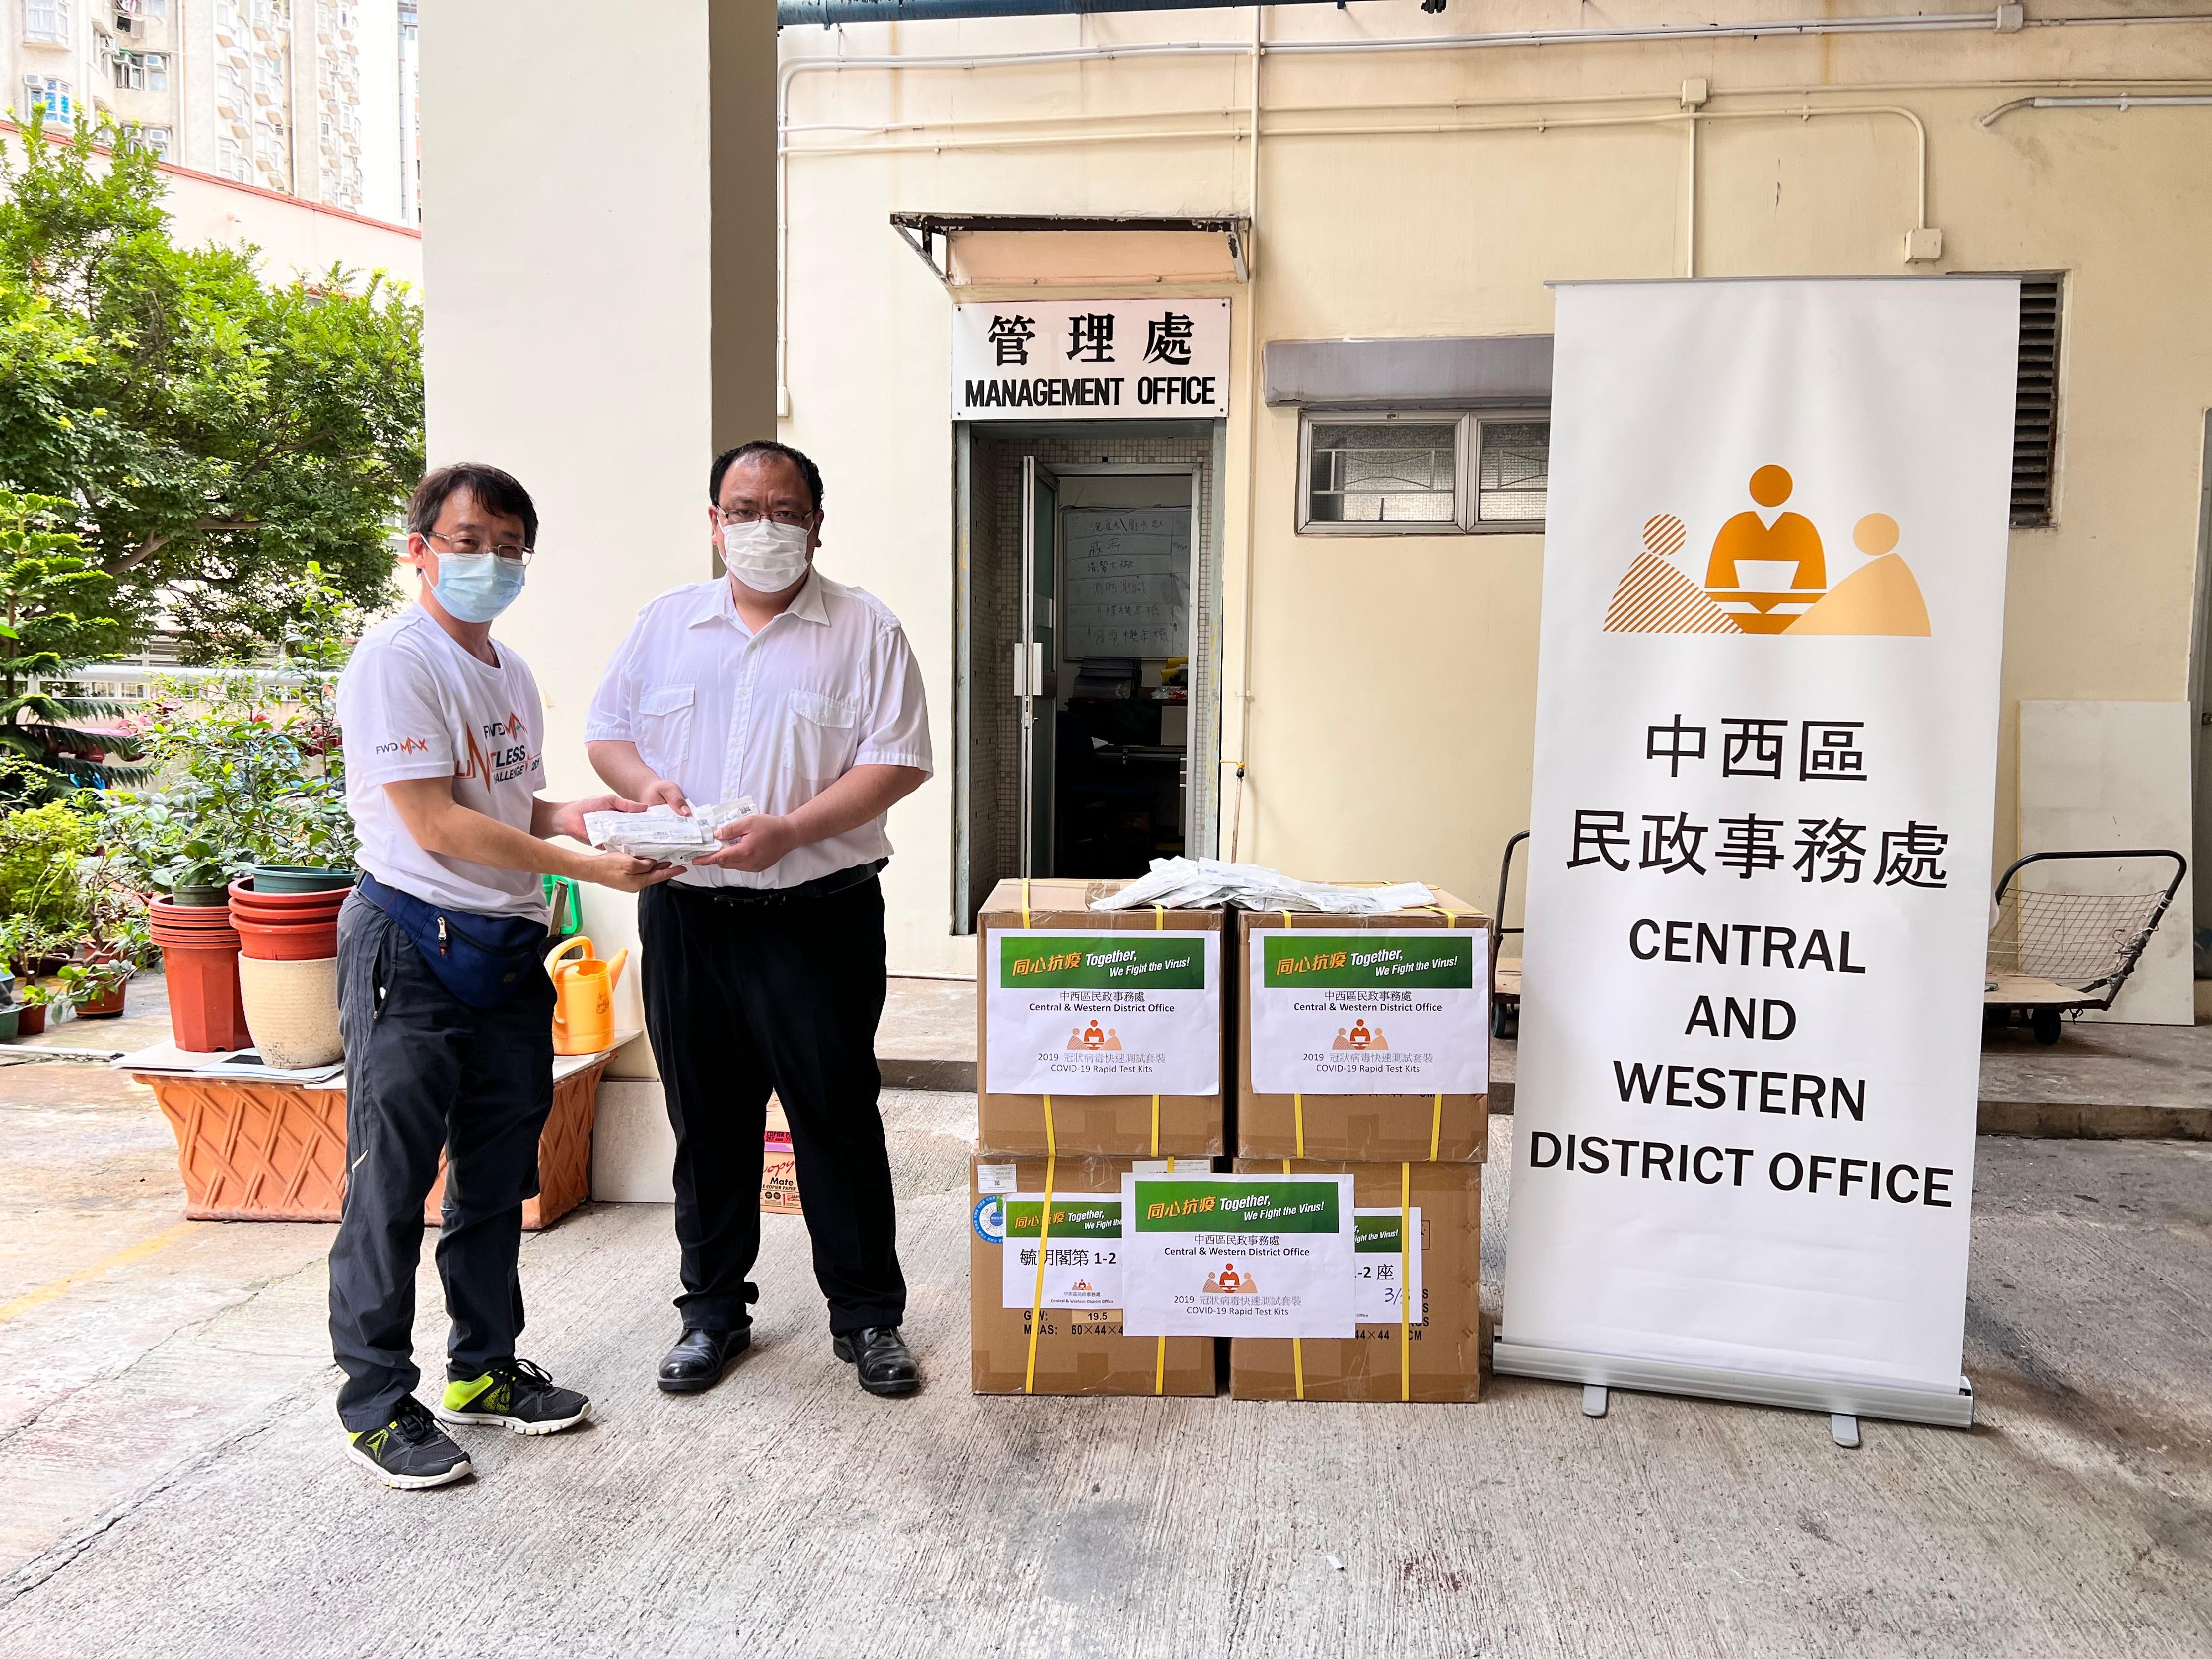 The Central and Western District Office today (June 22) distributed COVID-19 rapid test kits to households, cleansing workers and property management staff living and working in Centenary Mansion, Kwong Fung Terrace and residential premises around Sands Street, Holland Street and Sai Cheung Street, as well as residential premises around Third Street and Water Street, for voluntary testing through the property management companies and the owners' corporations.